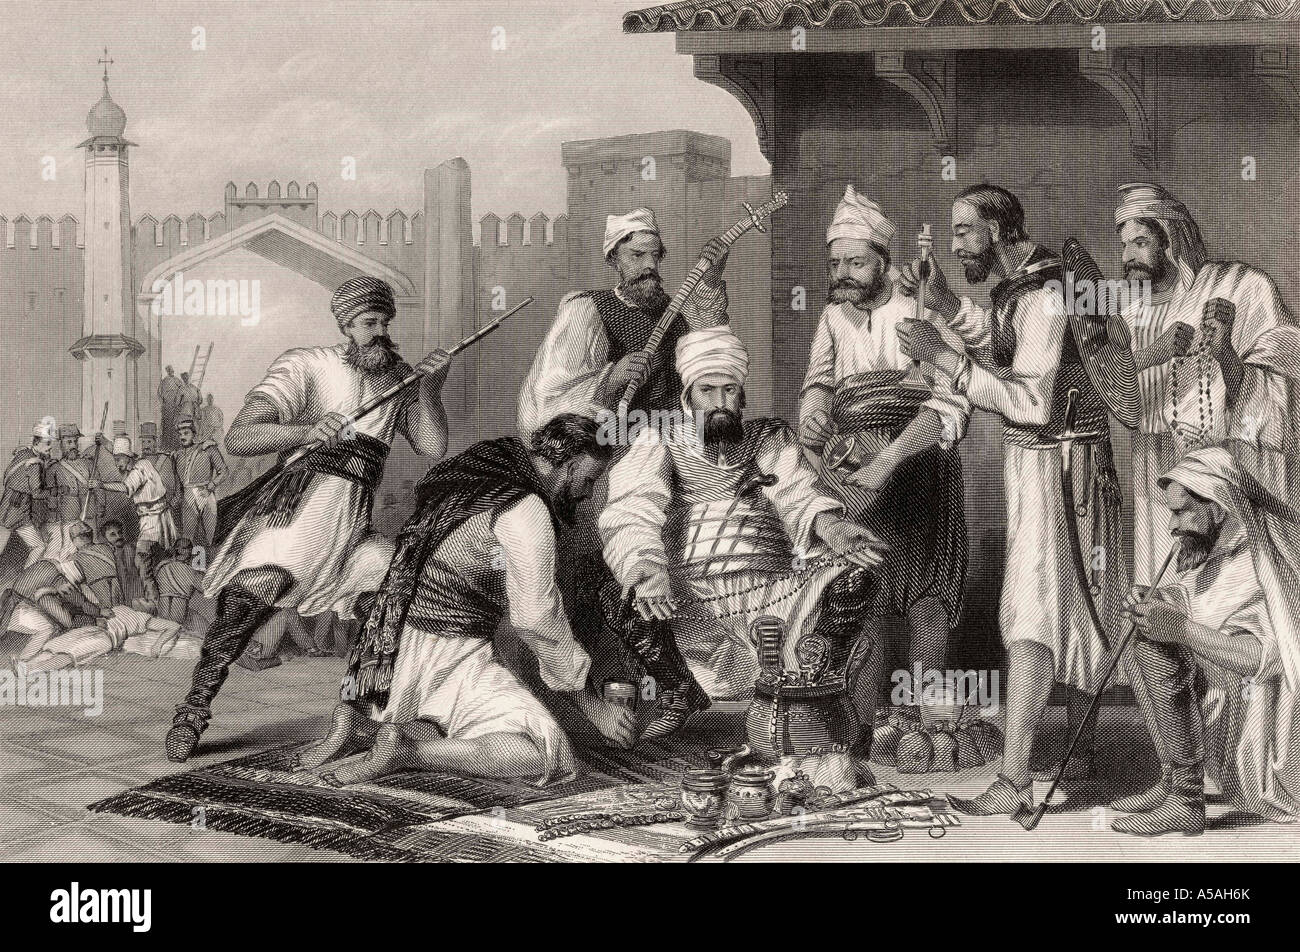 Sikh troops dividing the spoils taken from mutineers during The Indian Mutiny. Stock Photo